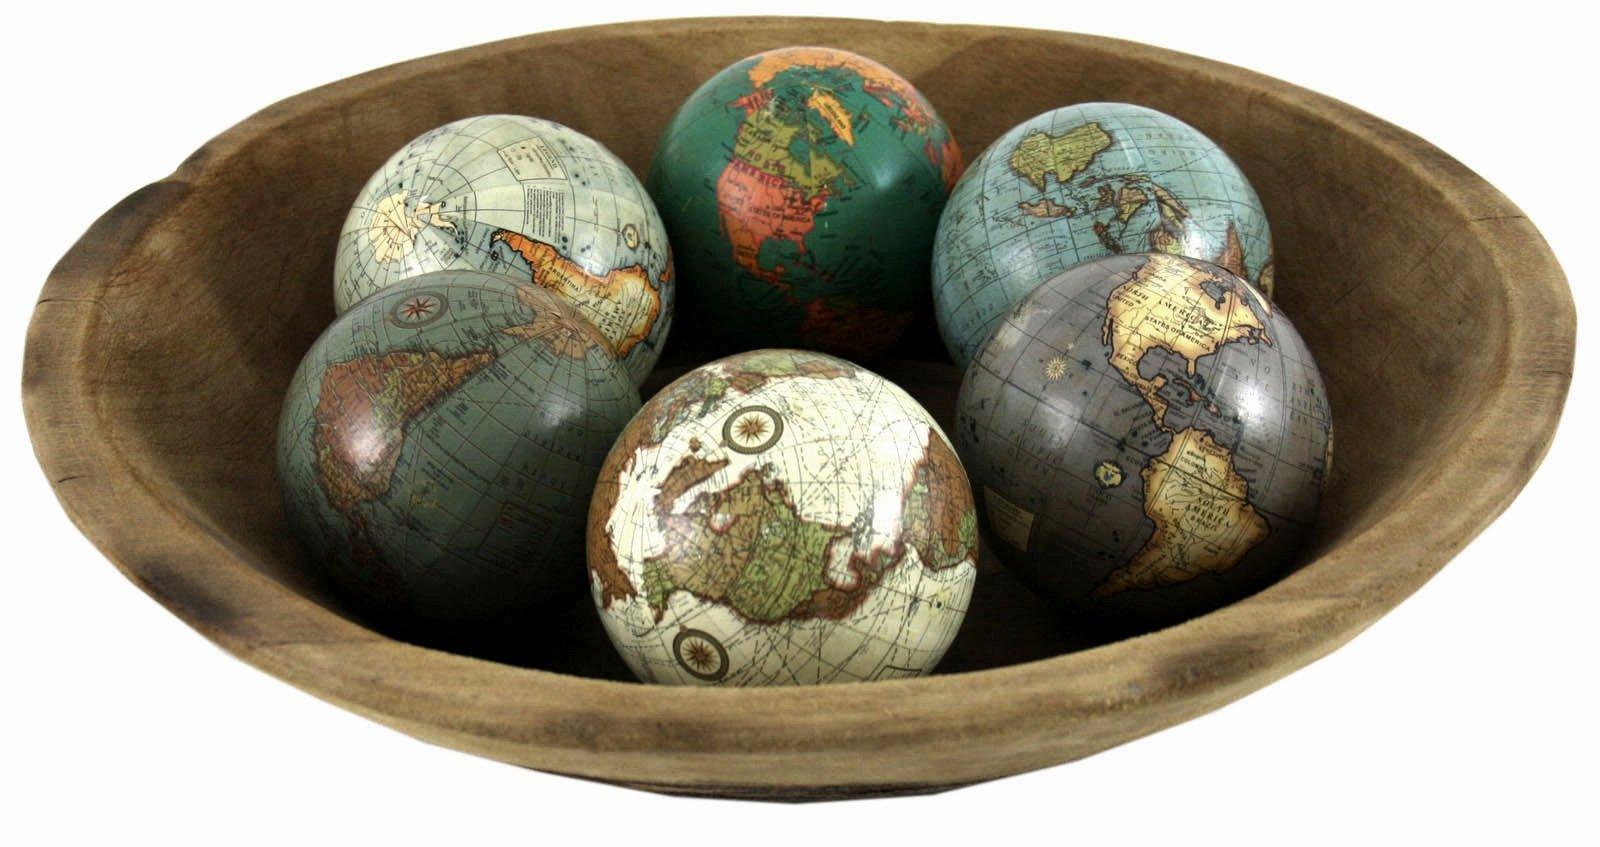 Set of 6 x 3 Inch Decorative Globes In Assorted Colours - £31.99 - Ornaments 